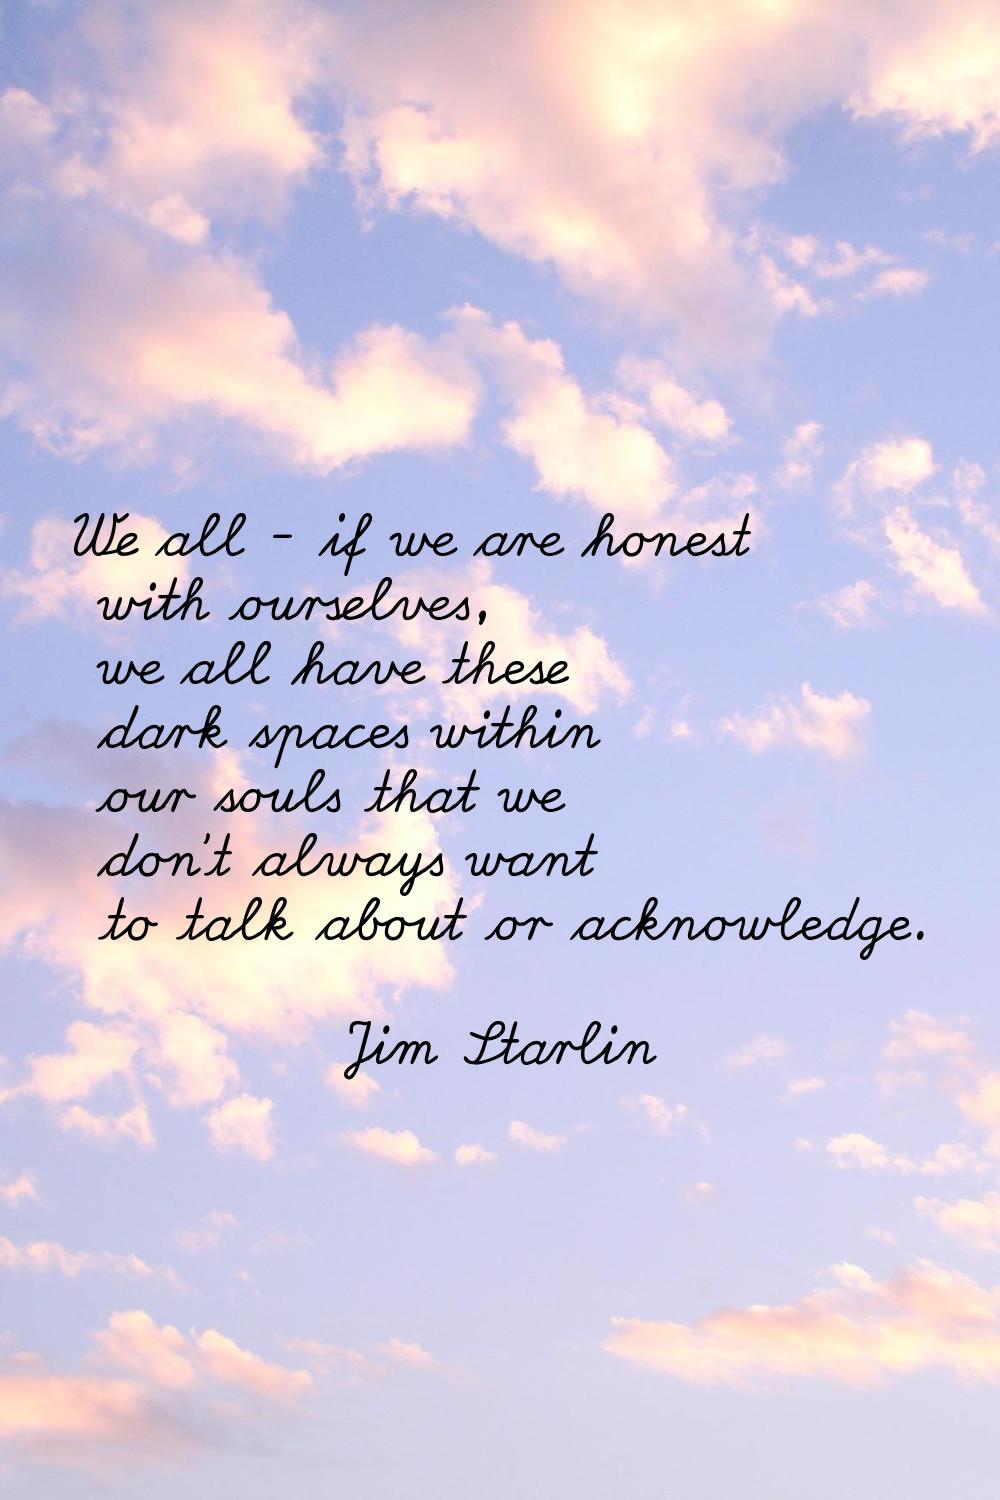 We all - if we are honest with ourselves, we all have these dark spaces within our souls that we do